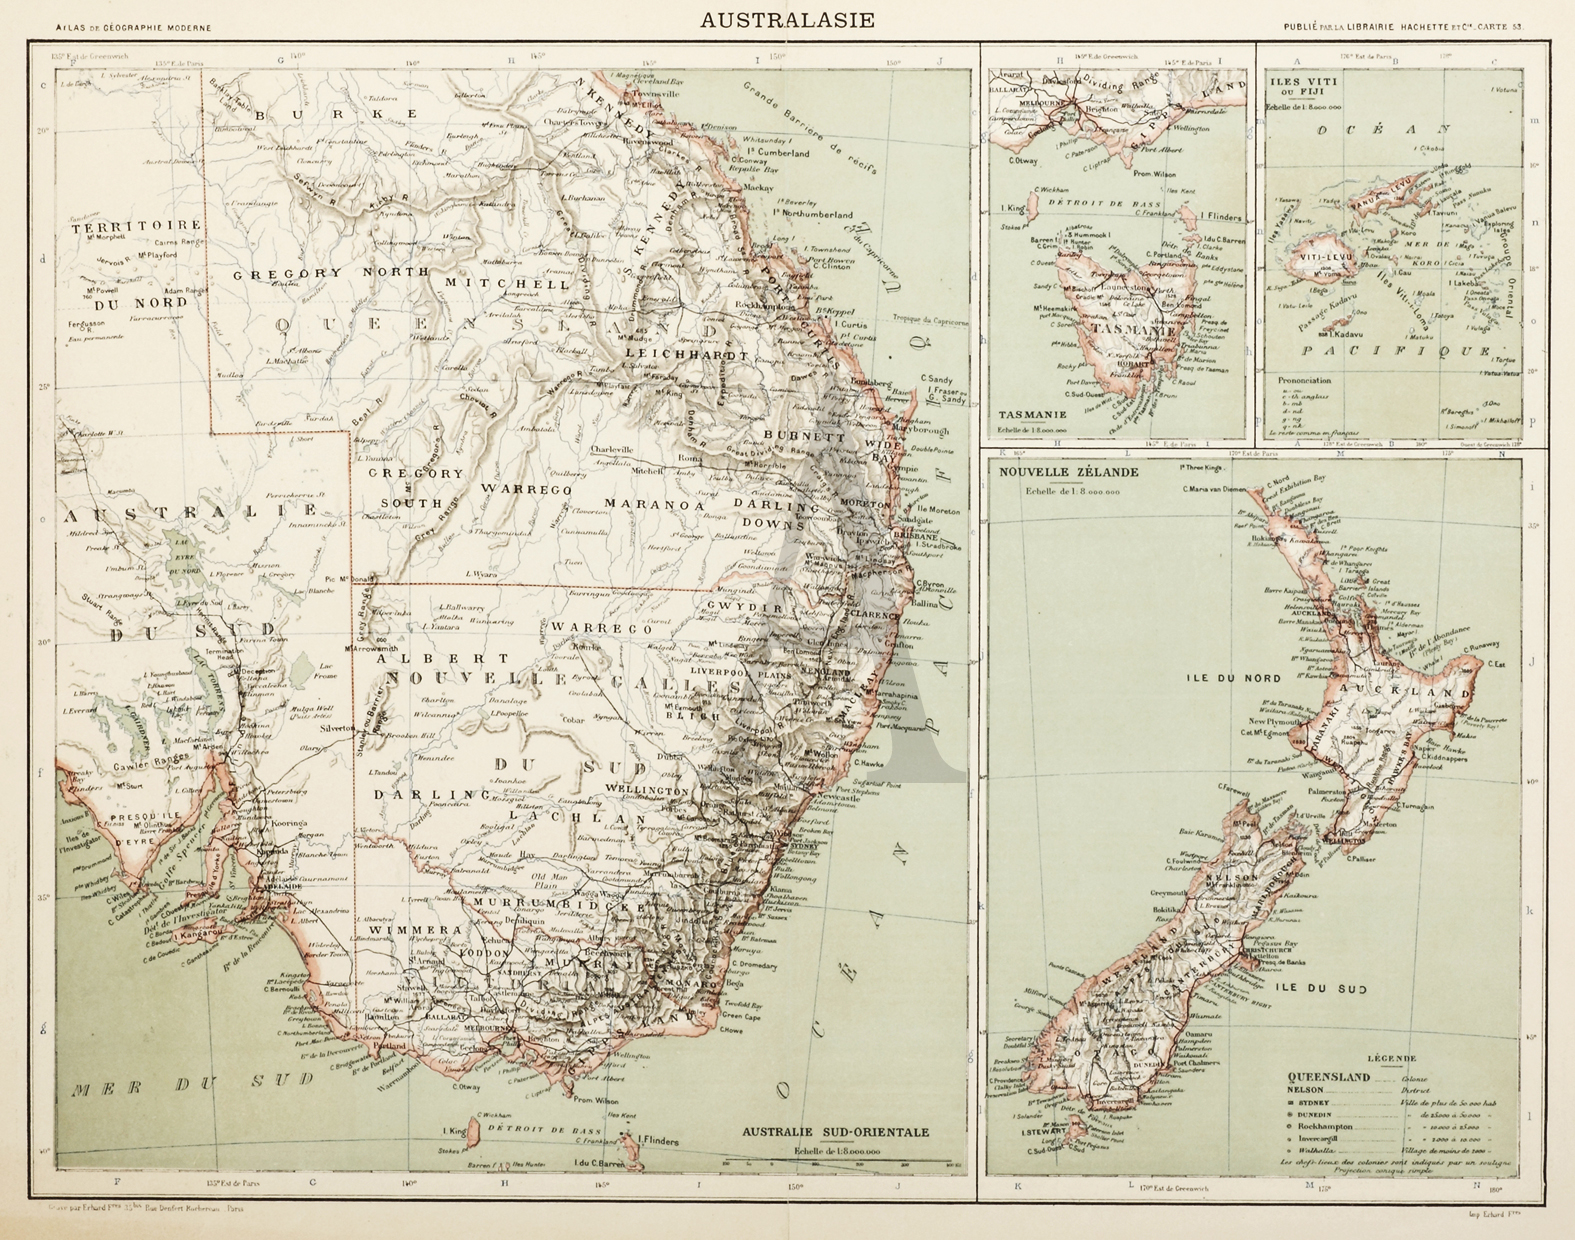 Australasie - Antique Map from 1890